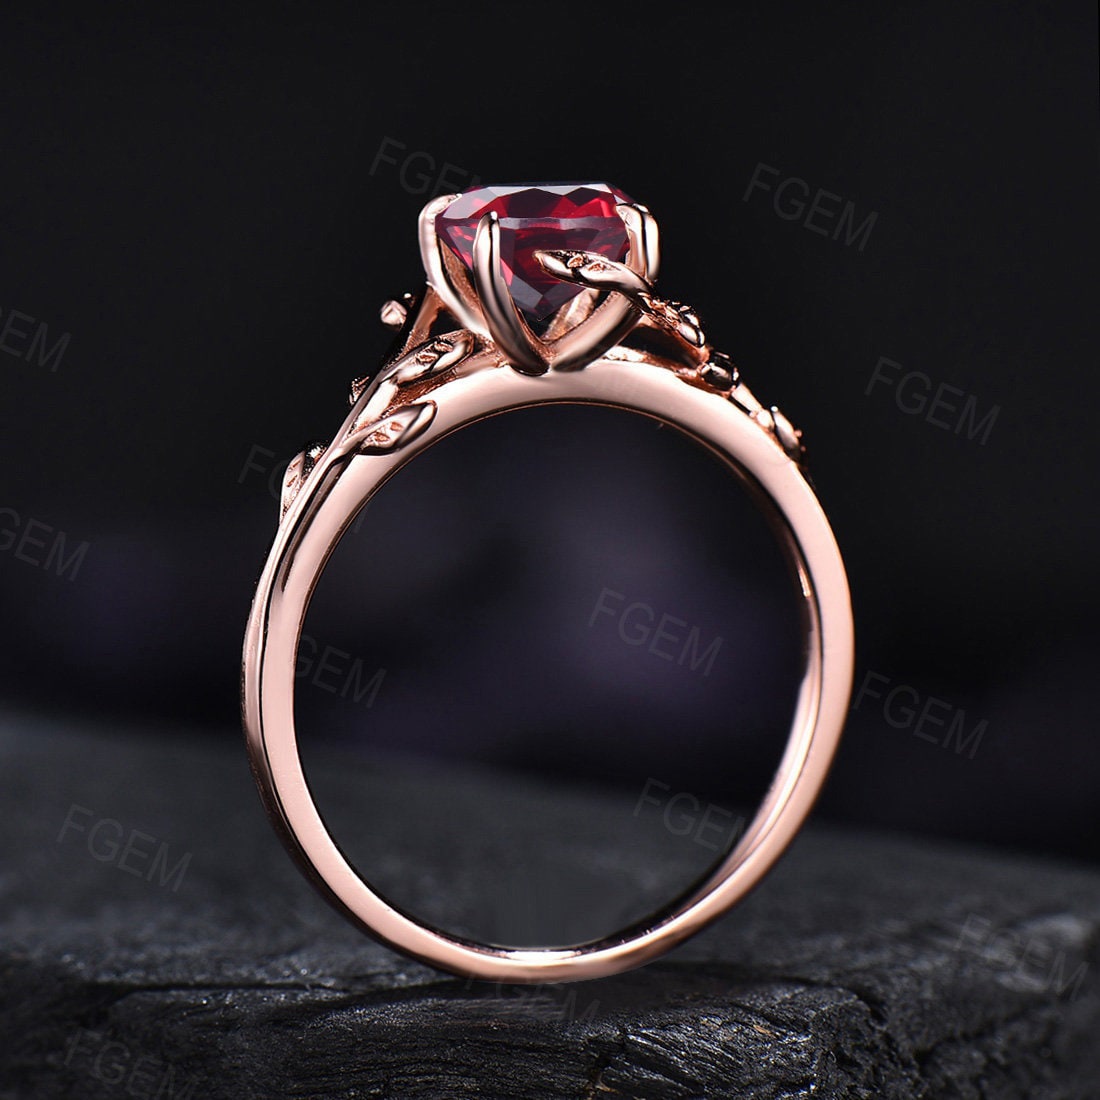 1ct Round Cut Nature Ruby Gemstone Jewelry 14K Rose Gold Twig Leaf Ruby Engagement Rings Unique Anniversary Ring Women July Birthstone Gift